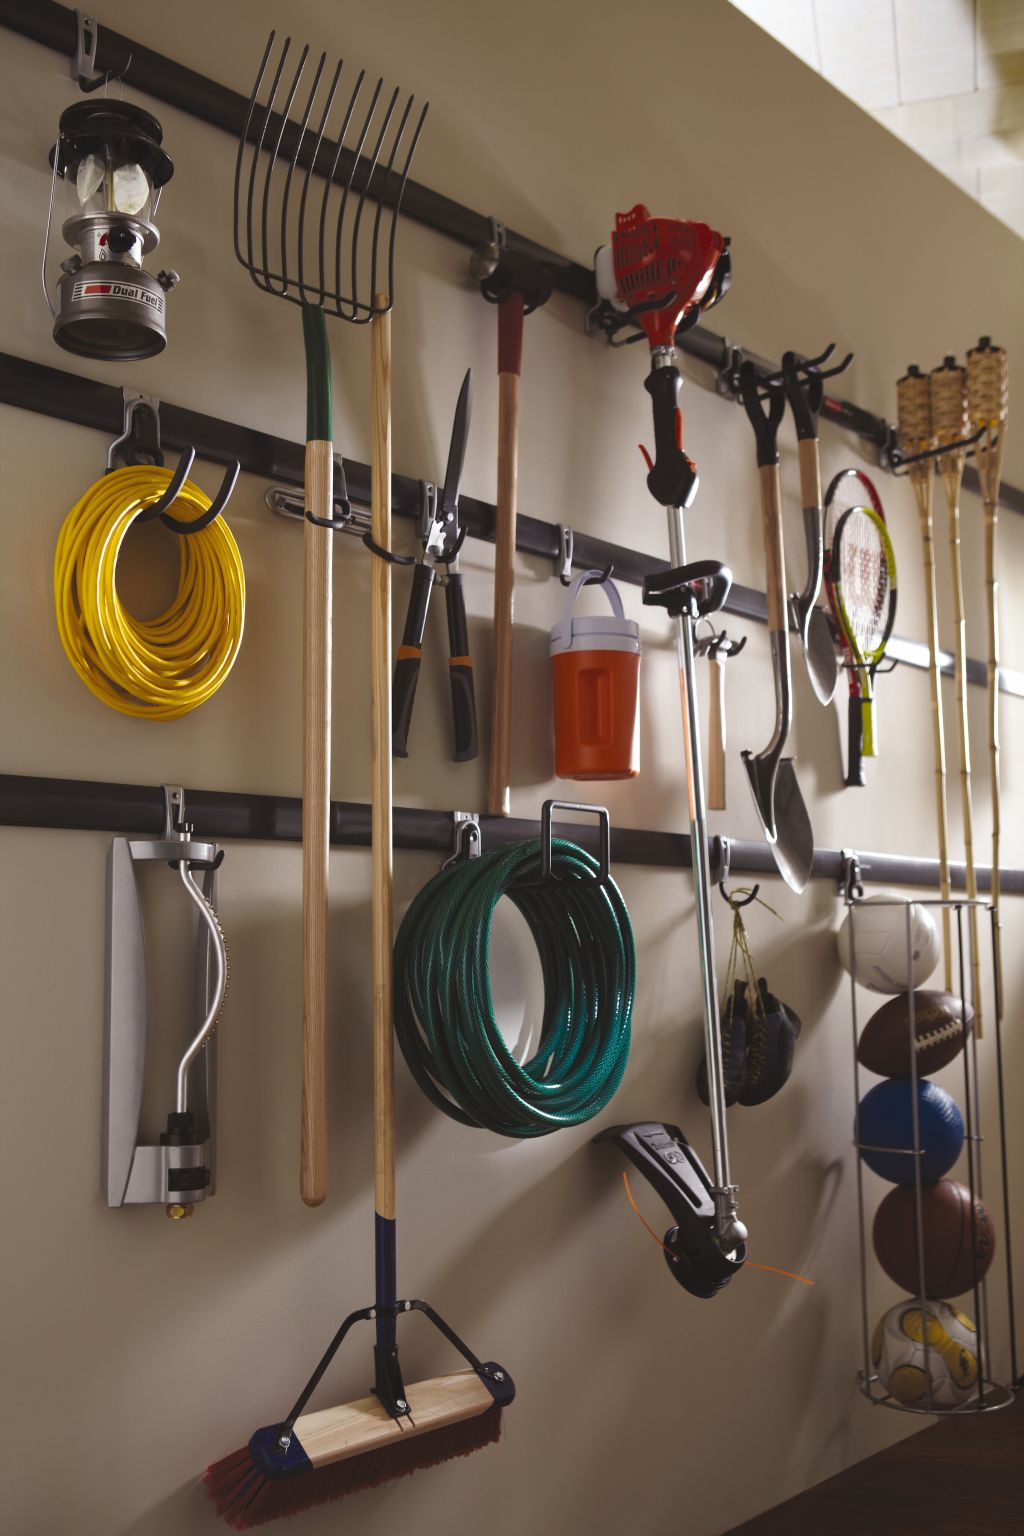 Garage Wall Organizer Systems
 Time To Sort Out The Mess – 20 Tips For A Well Organized